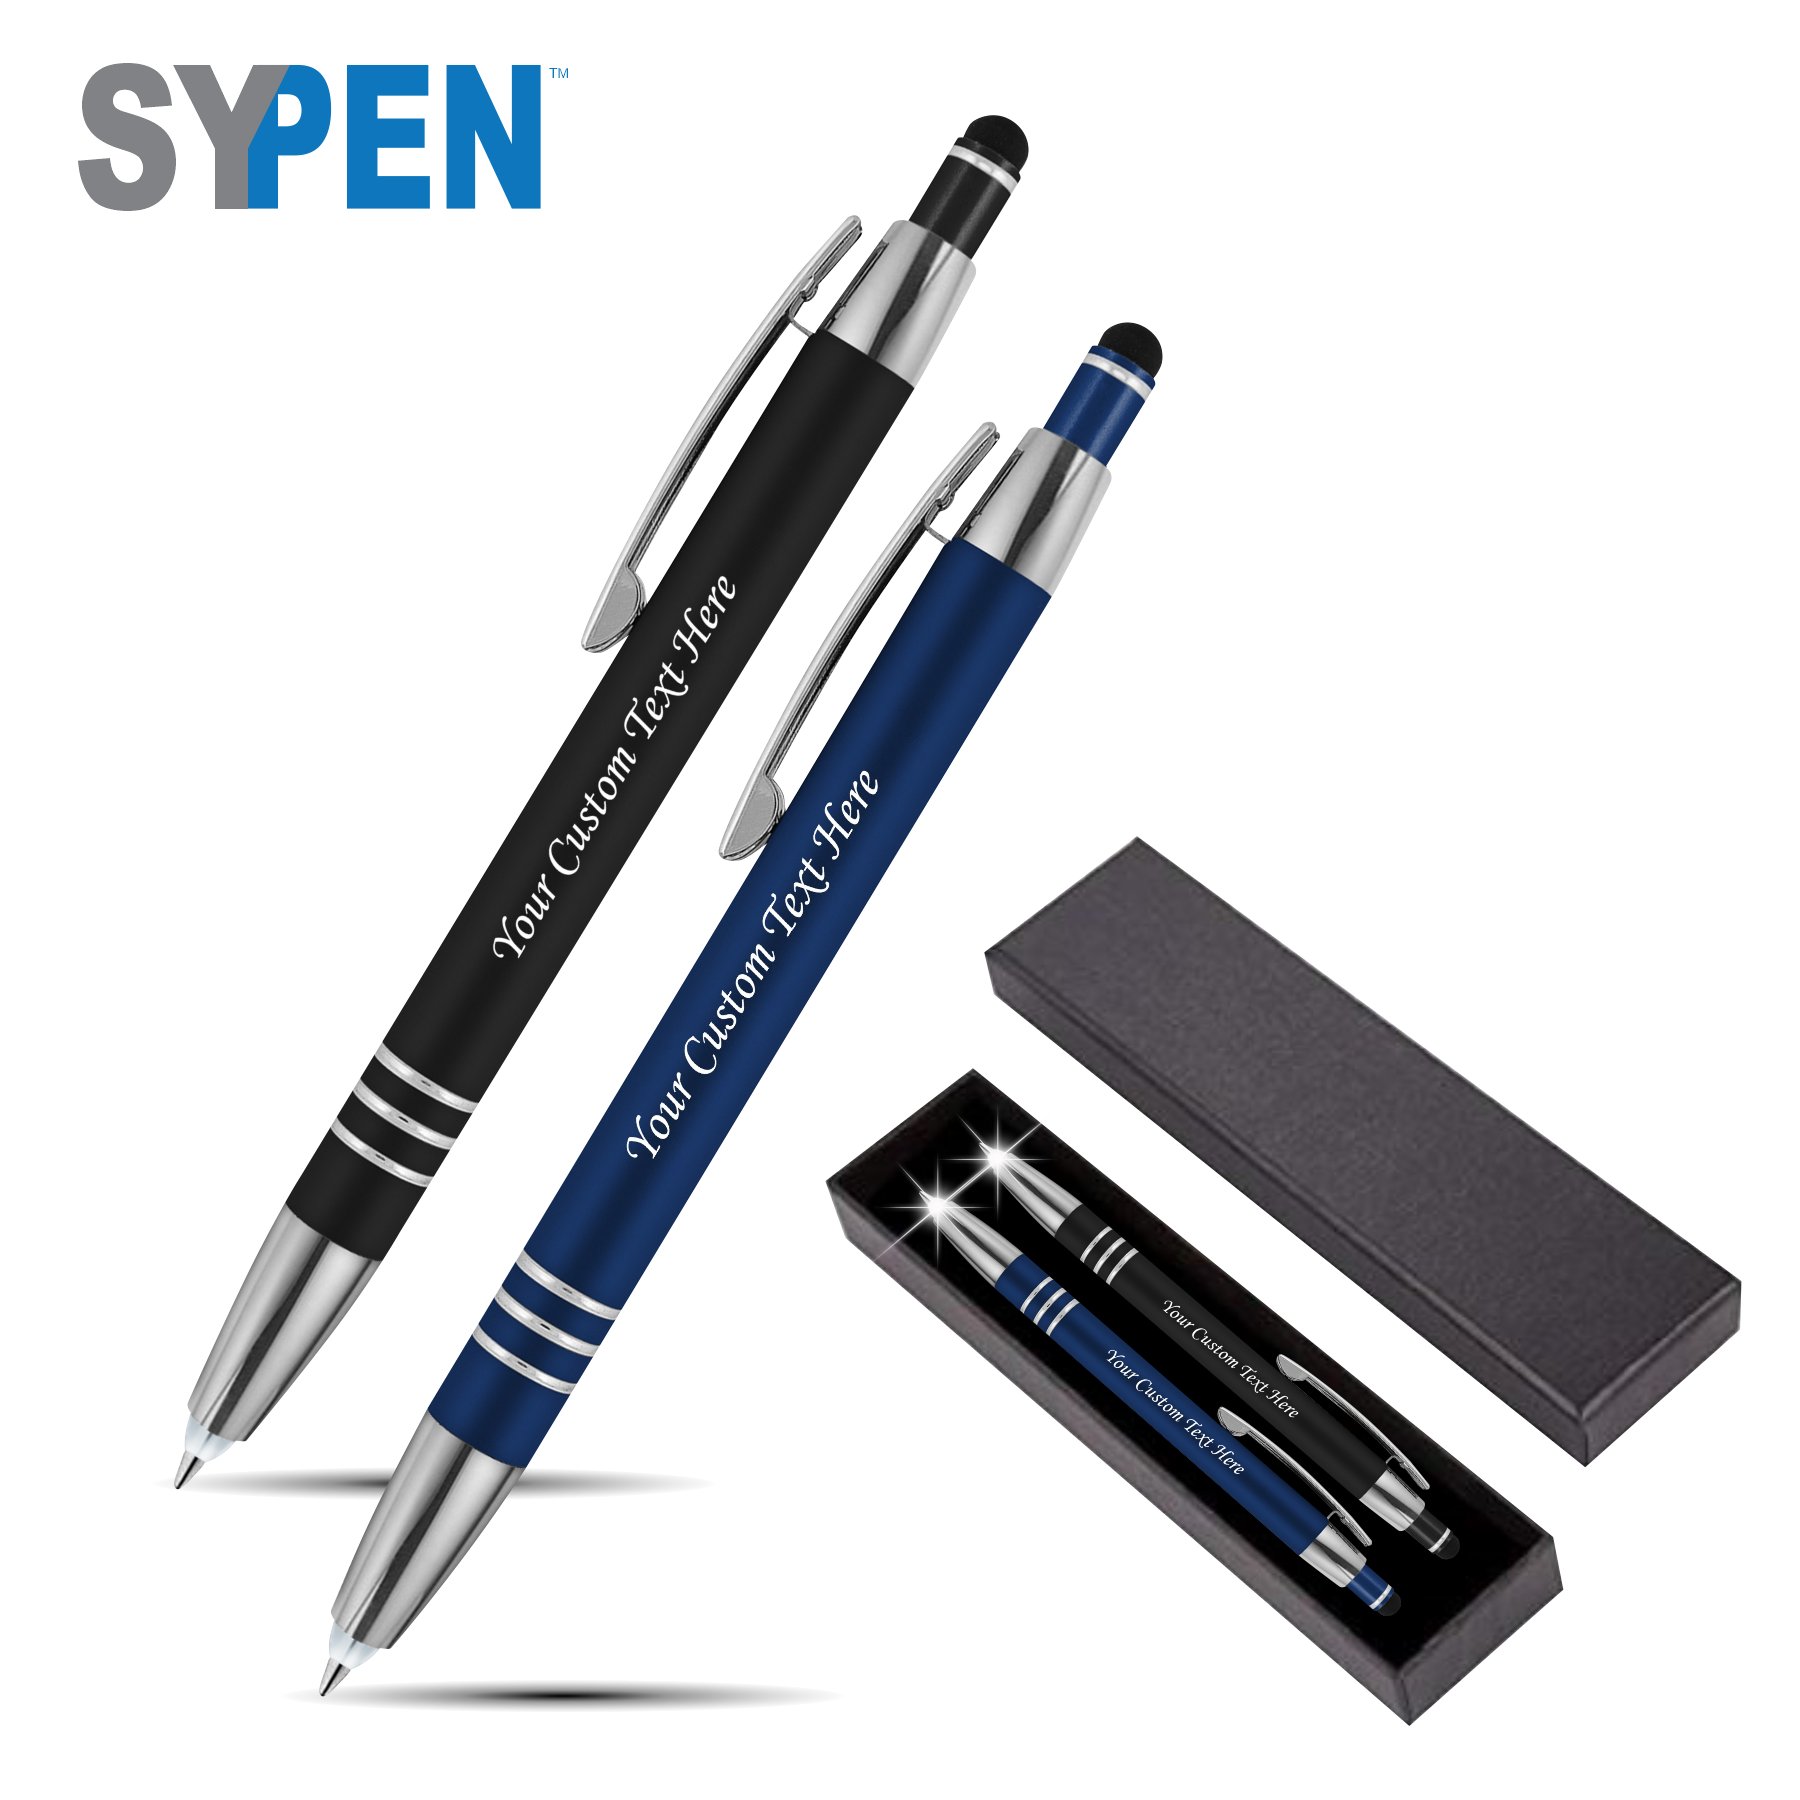 THE P3 STORE PERSONALIZED PEN AND KEYCHAIN GIFT SET Pen Gift Set - Buy THE  P3 STORE PERSONALIZED PEN AND KEYCHAIN GIFT SET Pen Gift Set - Pen Gift Set  Online at